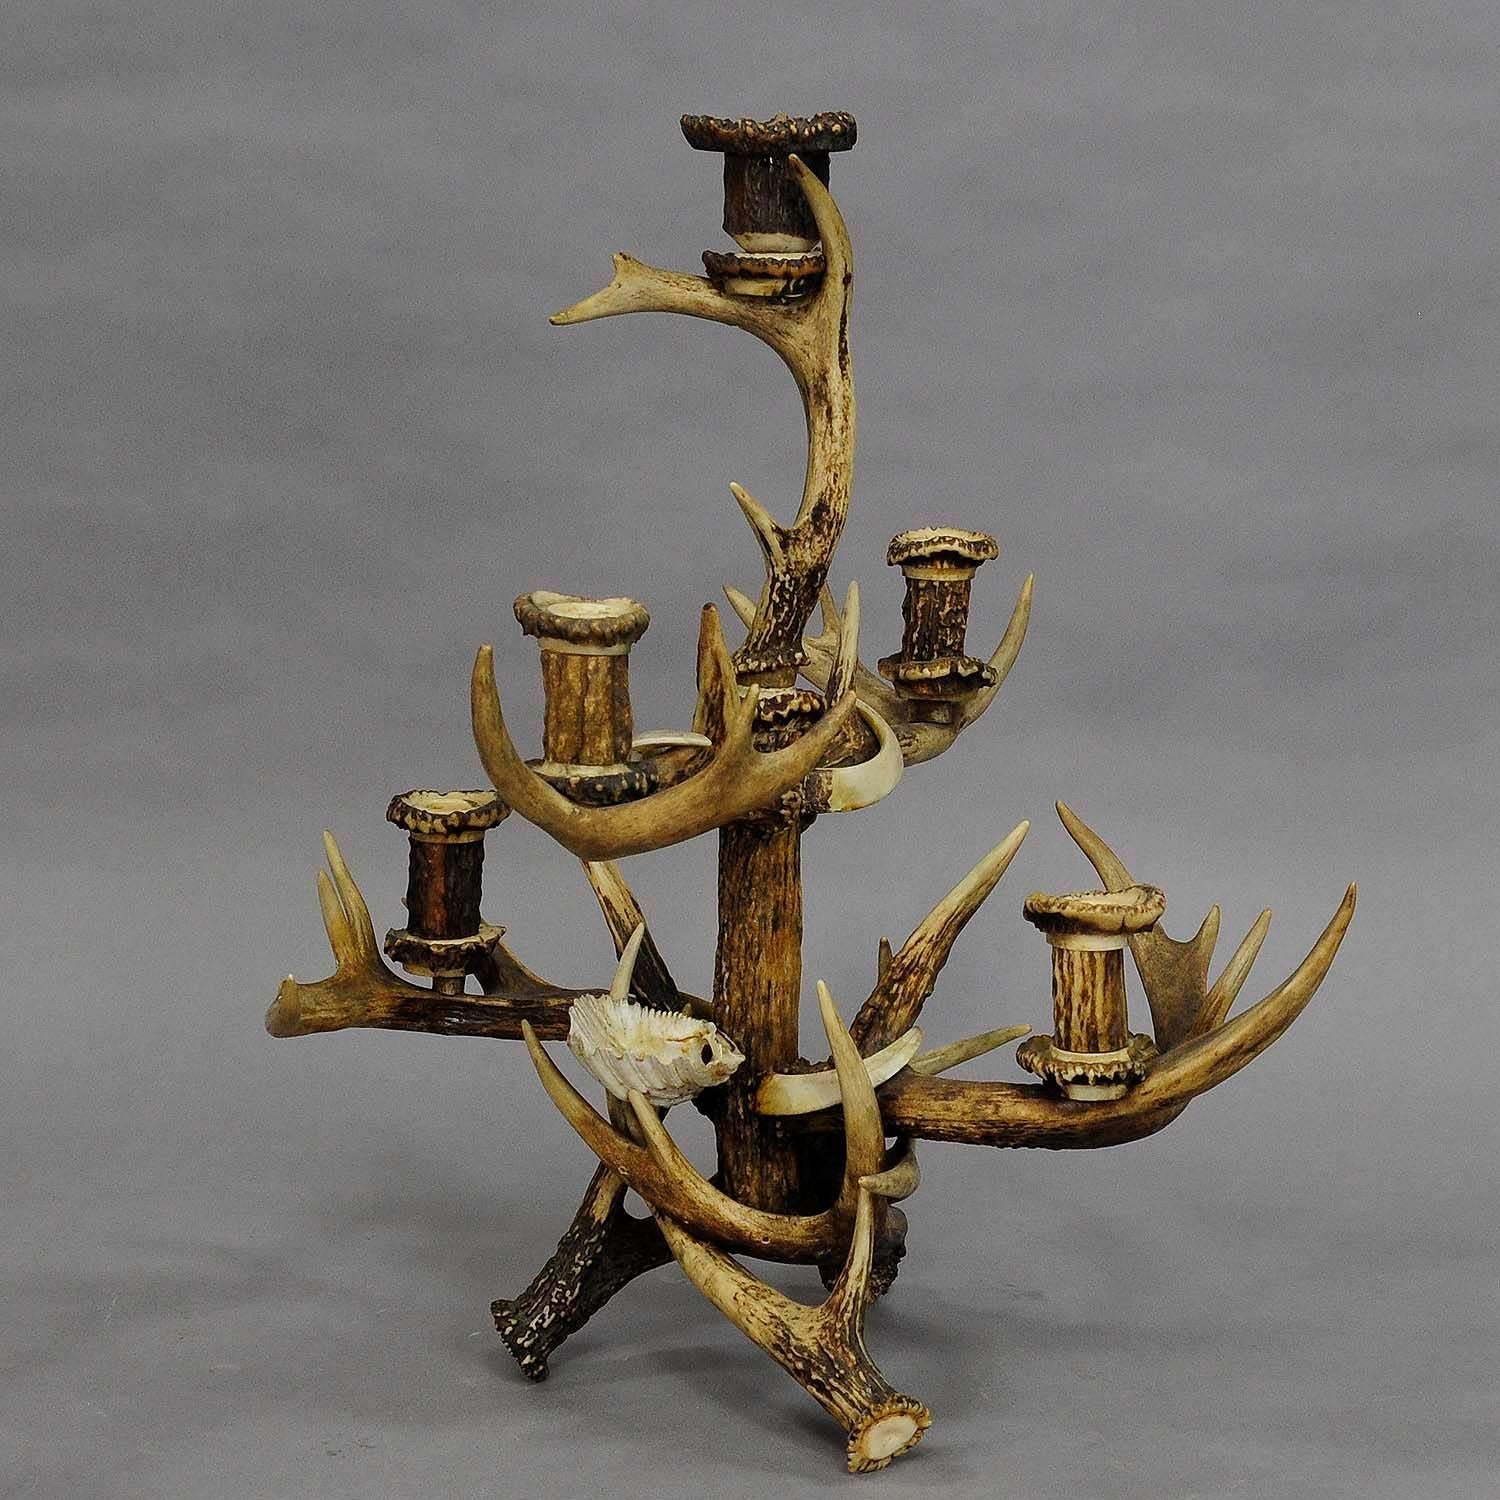 Black Forest Cabin Decor Antler Candelabra, circa 1900

A very rare and great cabin decor style five-armed candelabra with five candle spouts. Made of original deer and virginia deer antlers spouts made of turned horn roses and carved antler